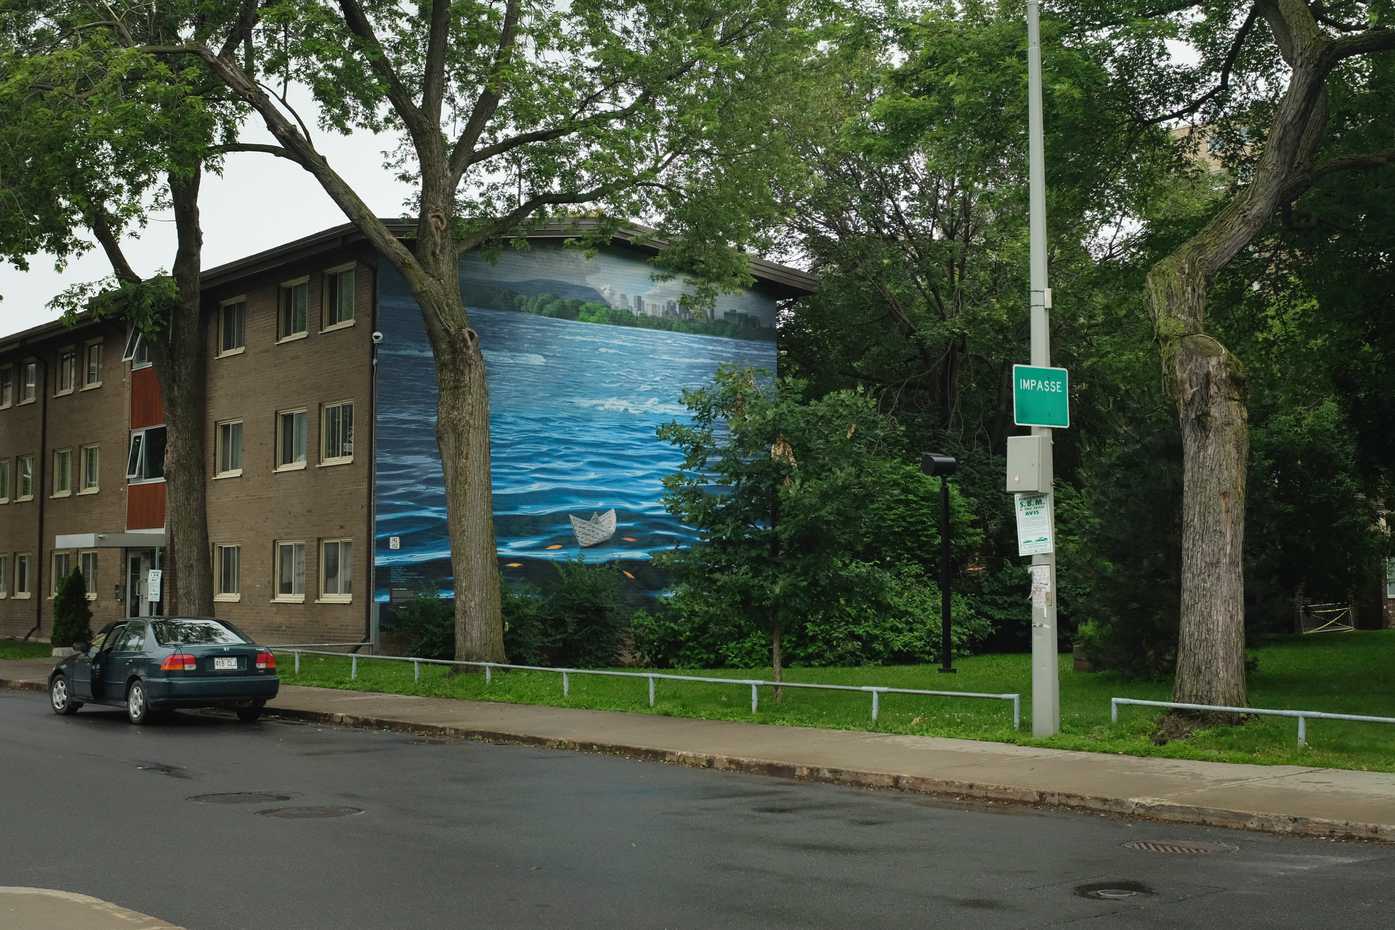 Montreal's public housing has some beautiful murals